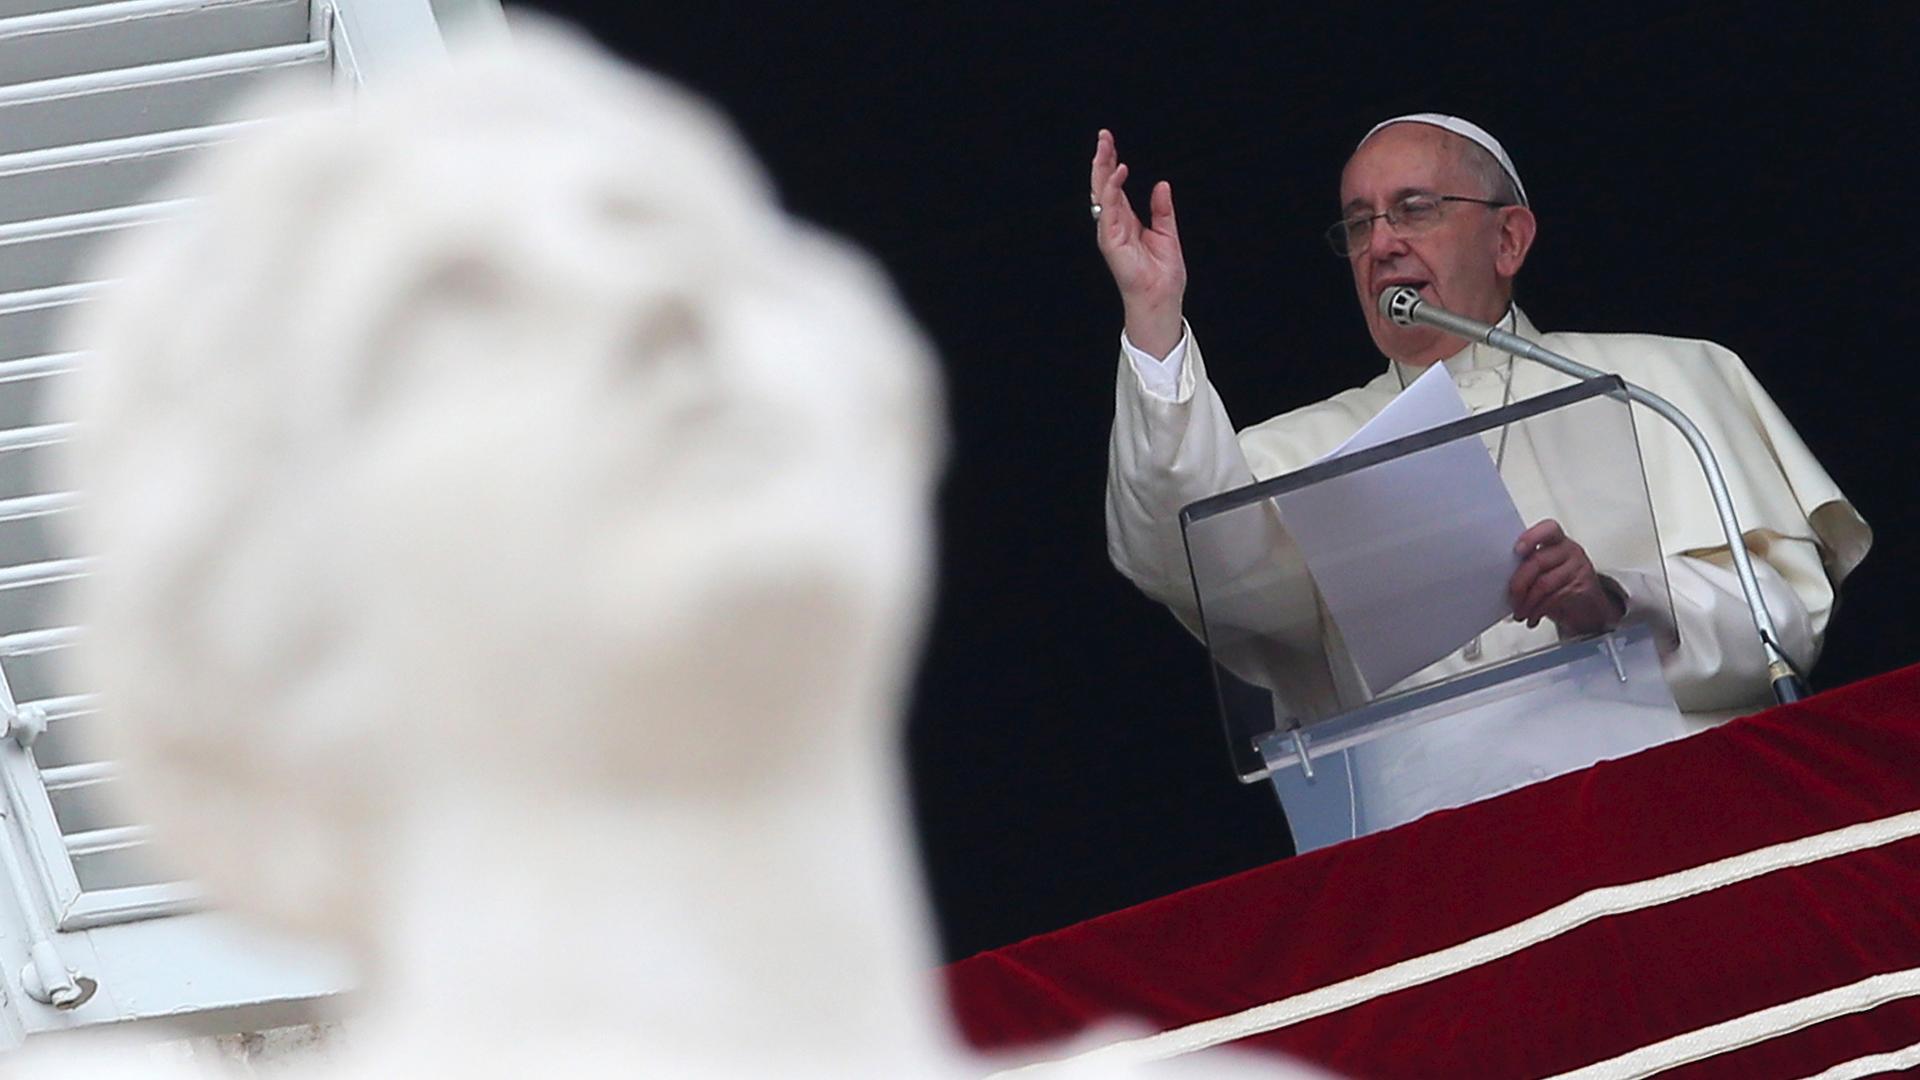 Pope Francis blesses the crowd gathered during his Sunday Angelus prayer on the feast of the Assumption.